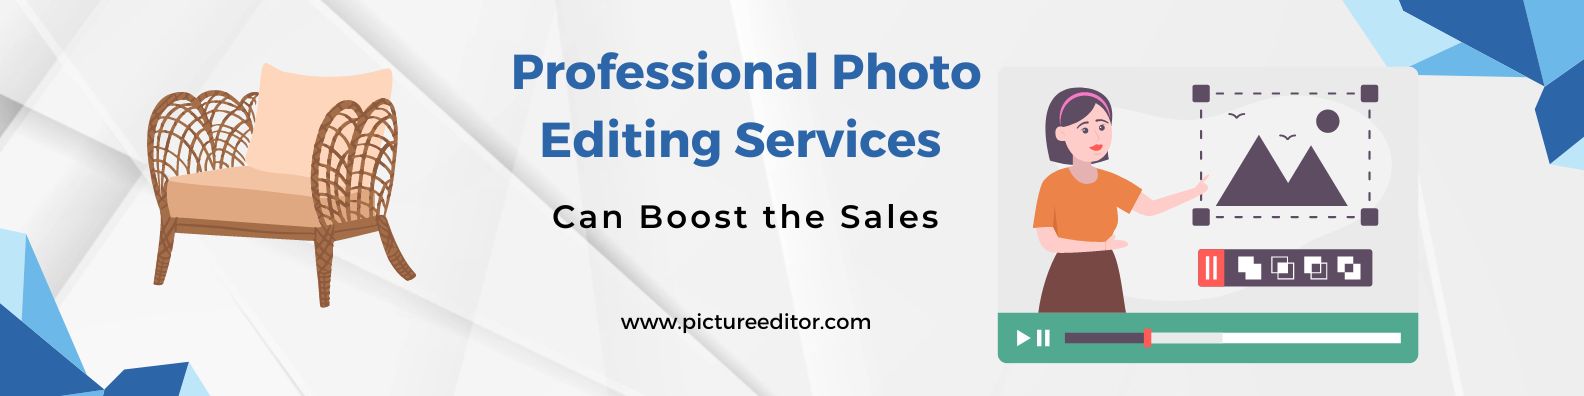 Professional Photo Editing Services Can Boost the Sales